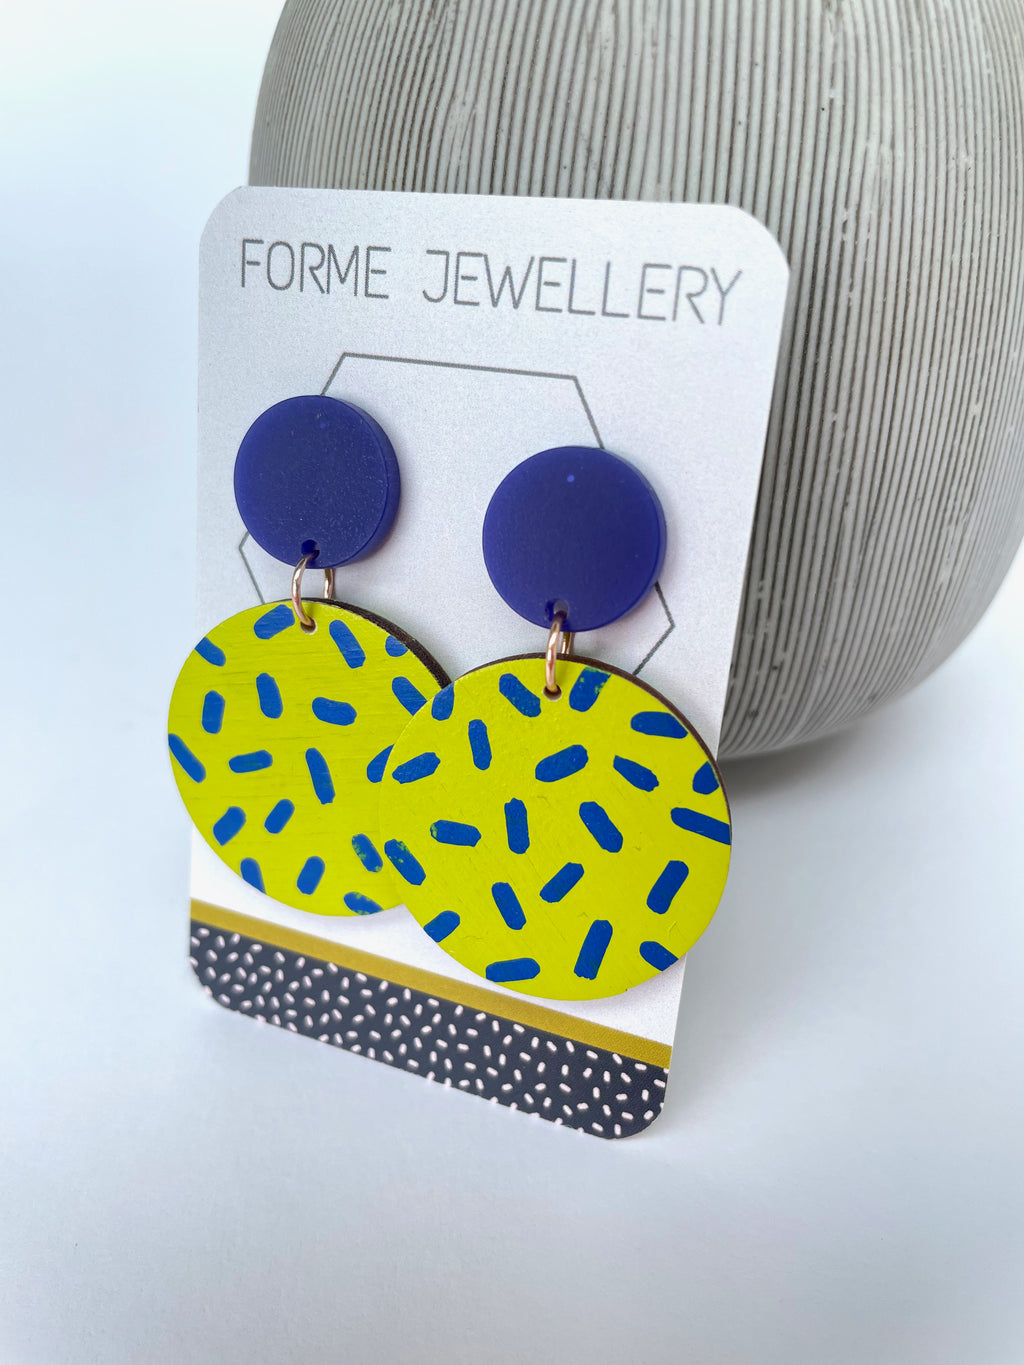 Bright acid yellow circular earrings with a dark blue dash patter